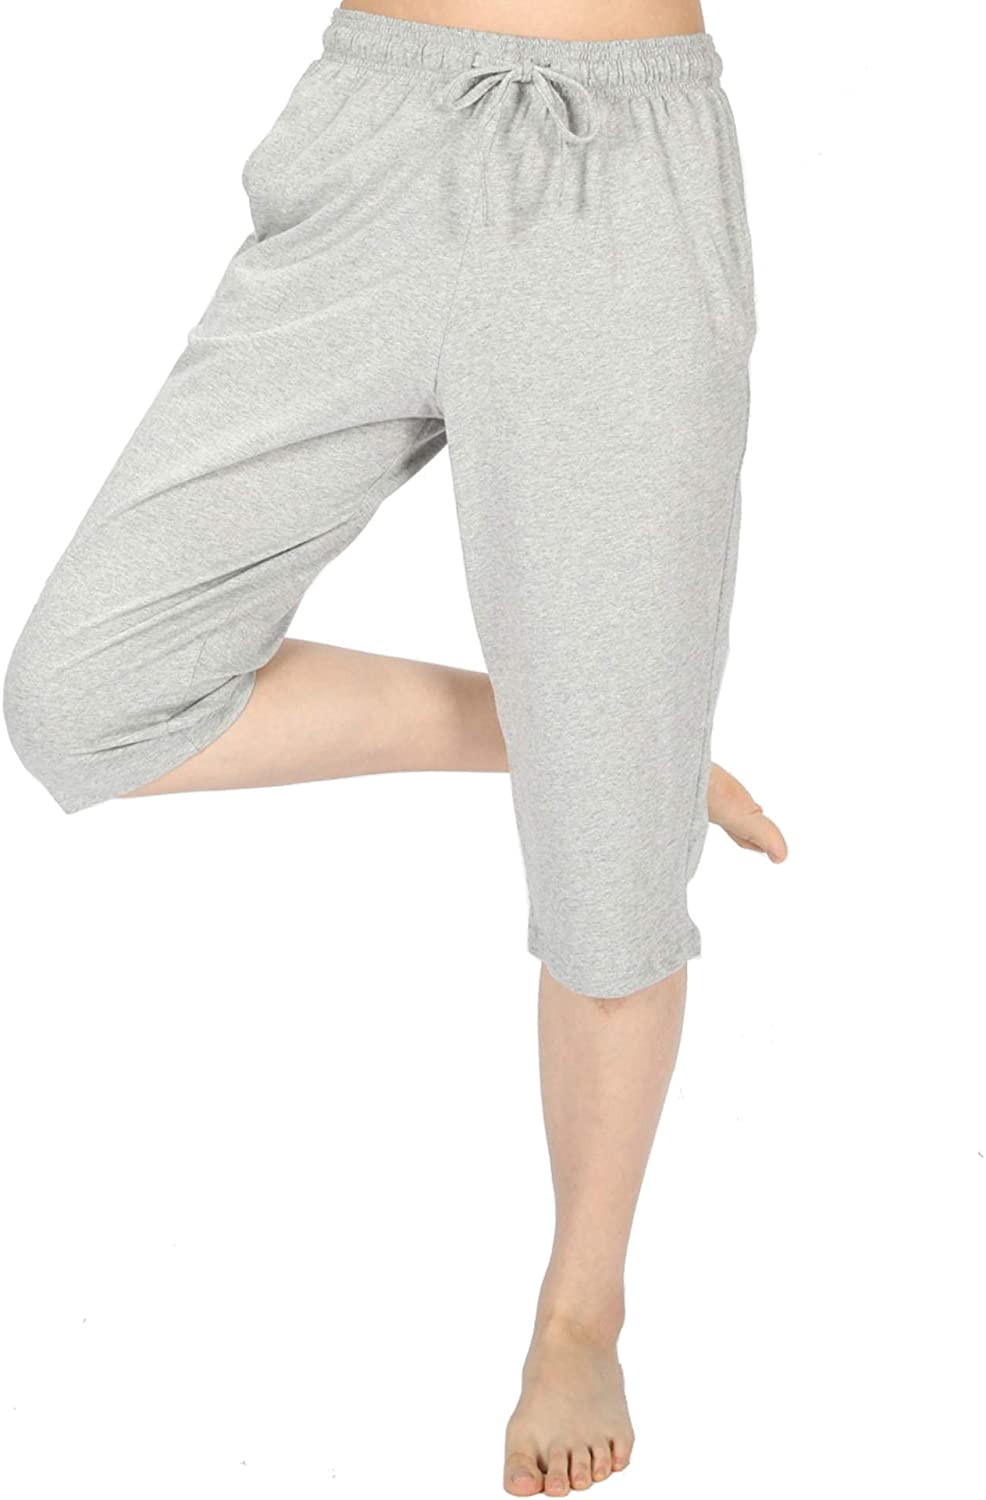 WEWINK CUKOO Women Pyjama Bottoms 100% Cotton Casual Cropped Trousers Lounge Pants with Pockets 